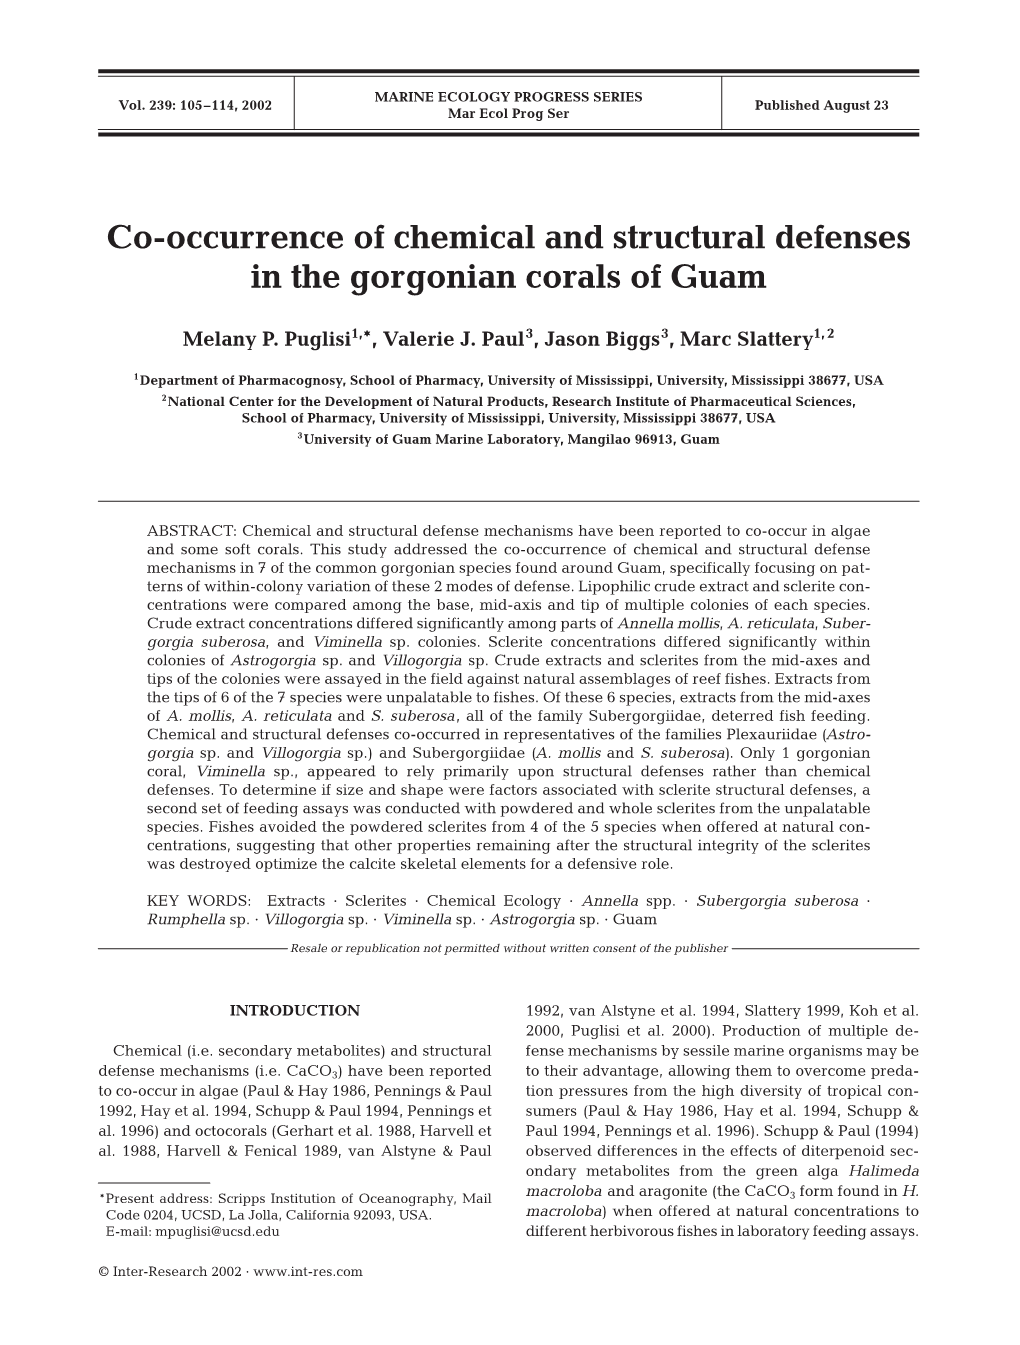 Co-Occurrence of Chemical and Structural Defenses in the Gorgonian Corals of Guam